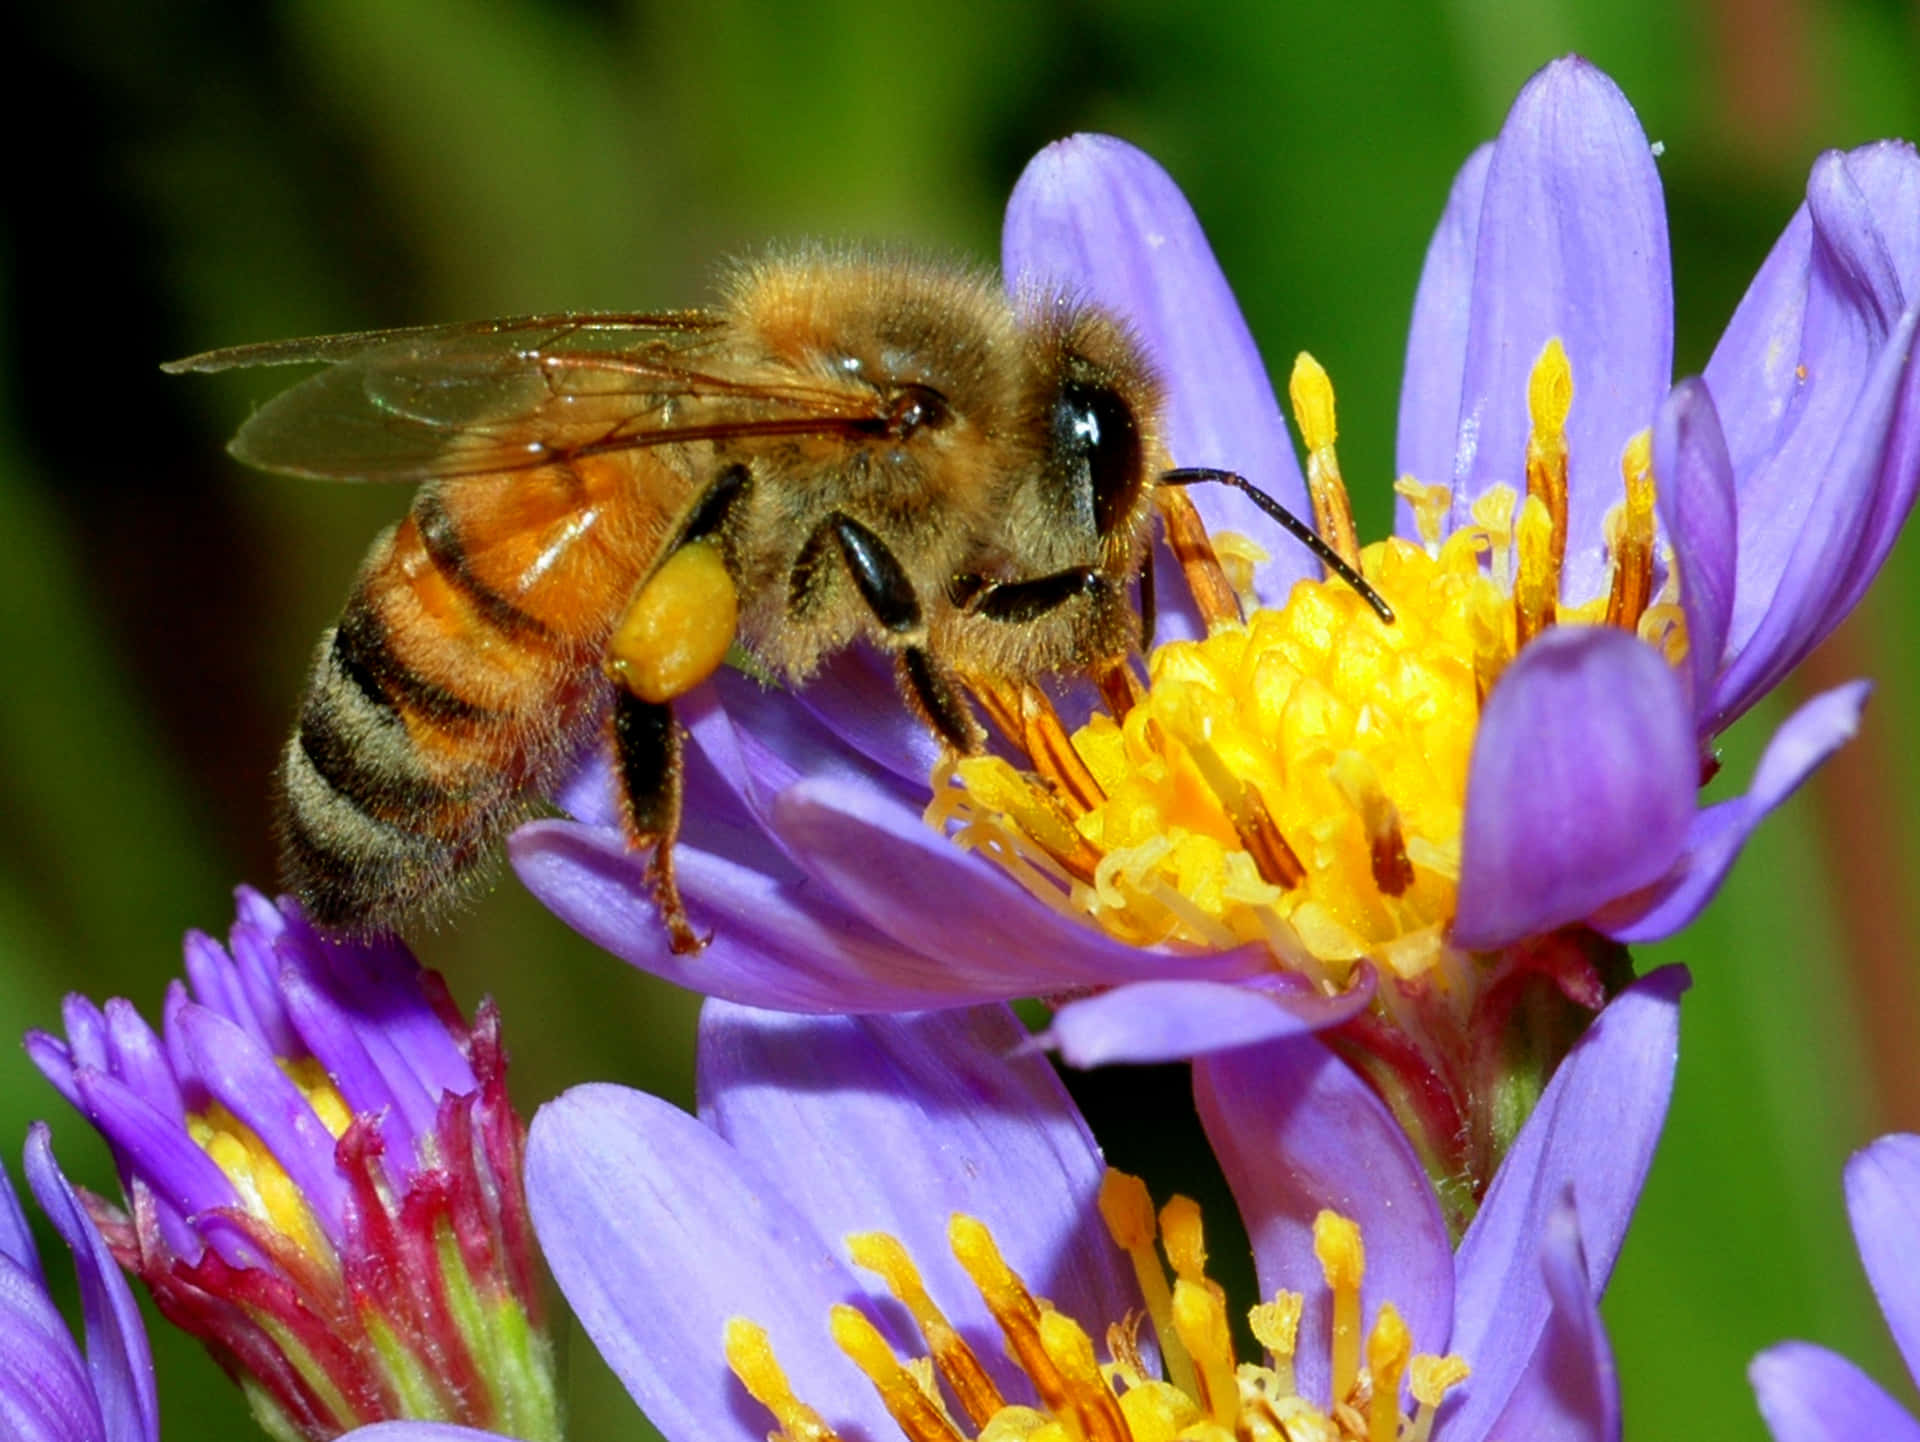 A Bee Pollinating a Flower